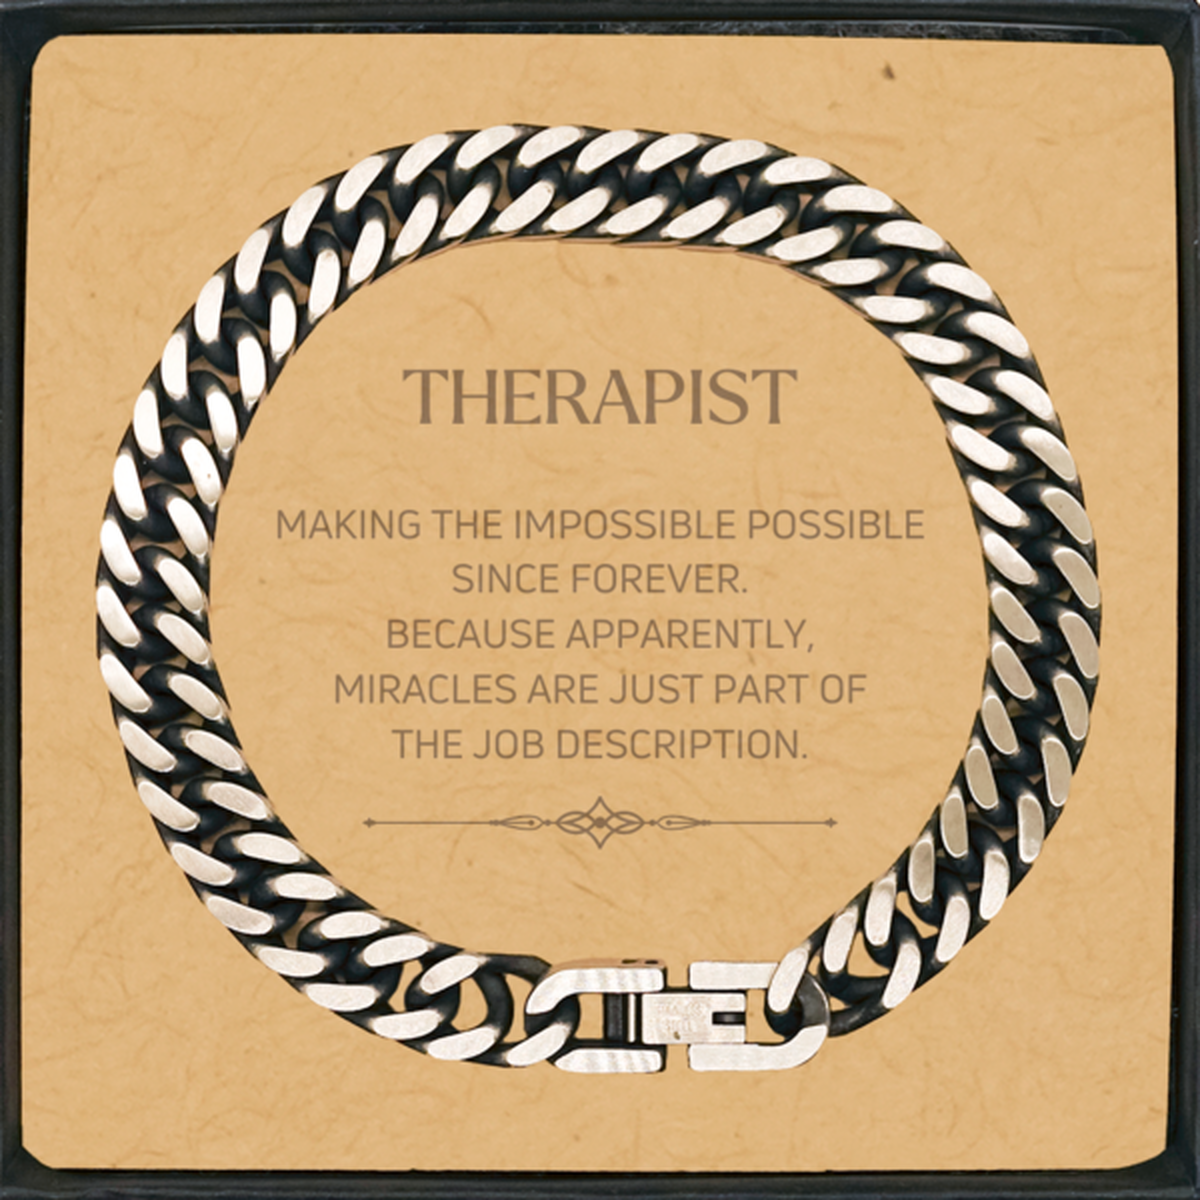 Funny Therapist Gifts, Miracles are just part of the job description, Inspirational Birthday Cuban Link Chain Bracelet For Therapist, Men, Women, Coworkers, Friends, Boss